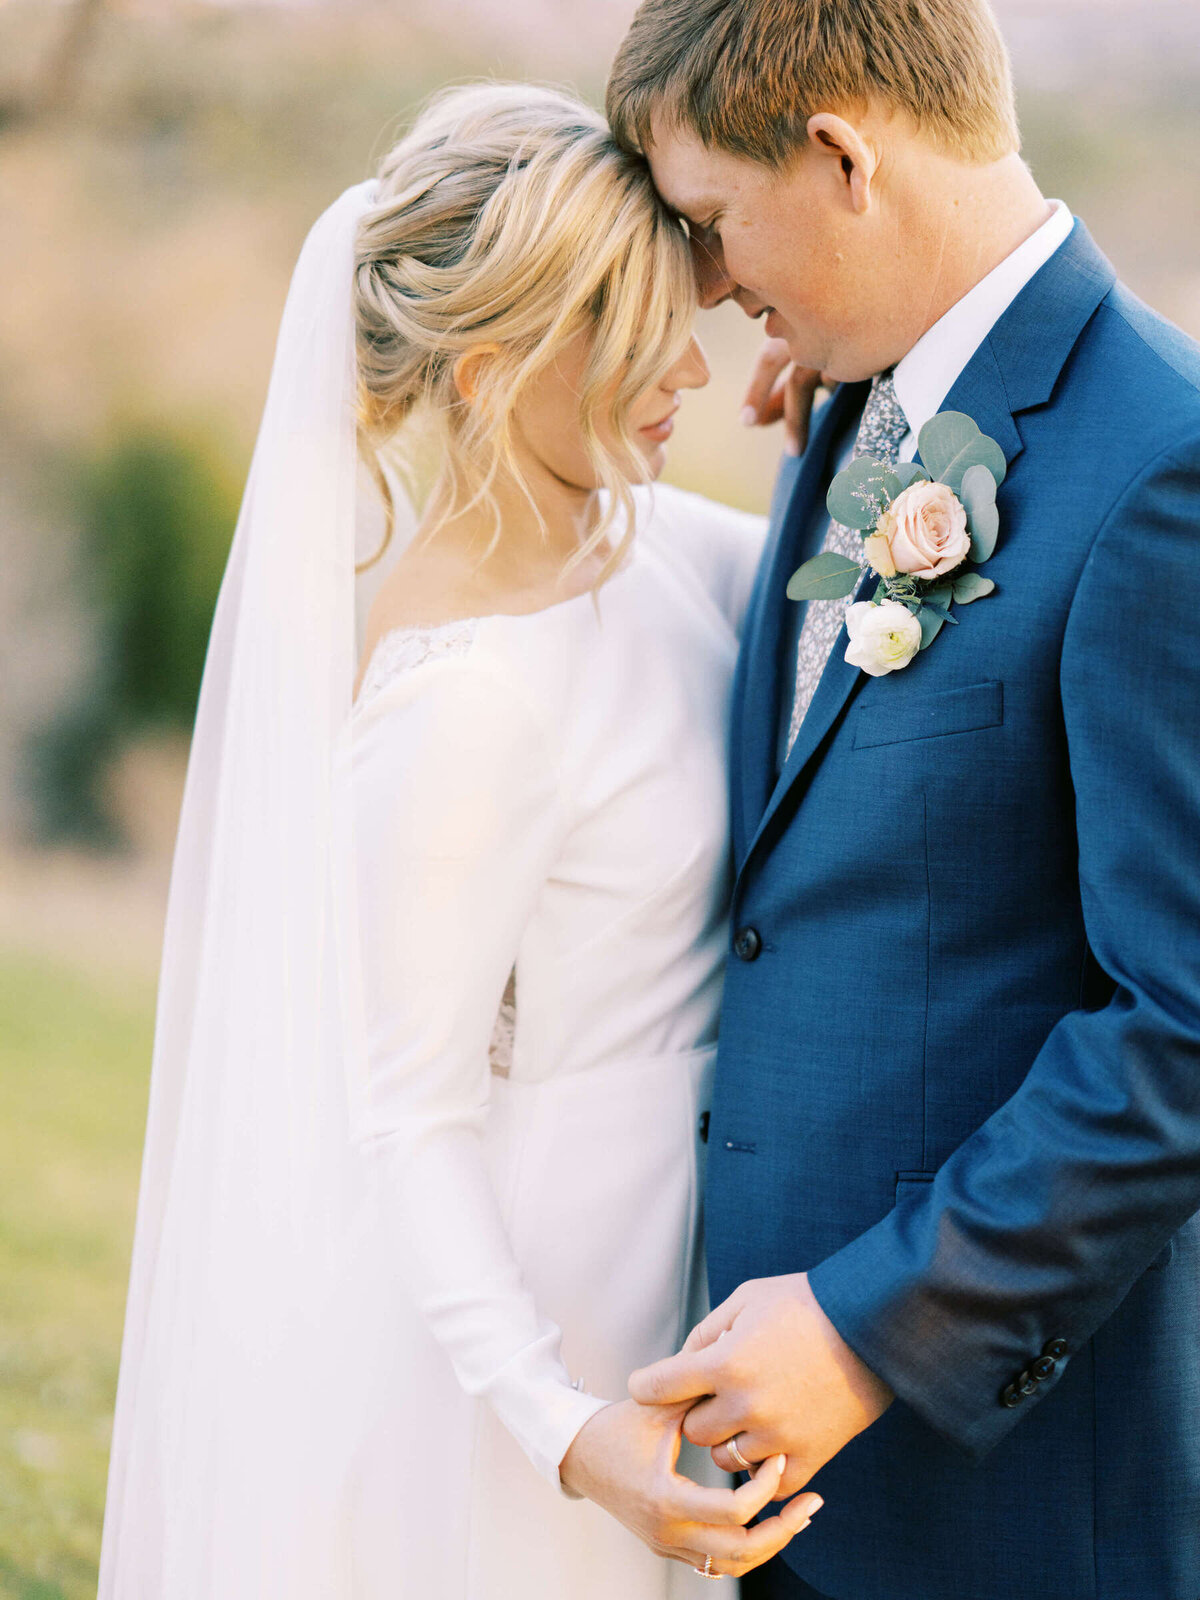 Bride and groom hold hands while embracing at Dripping Springs wedding